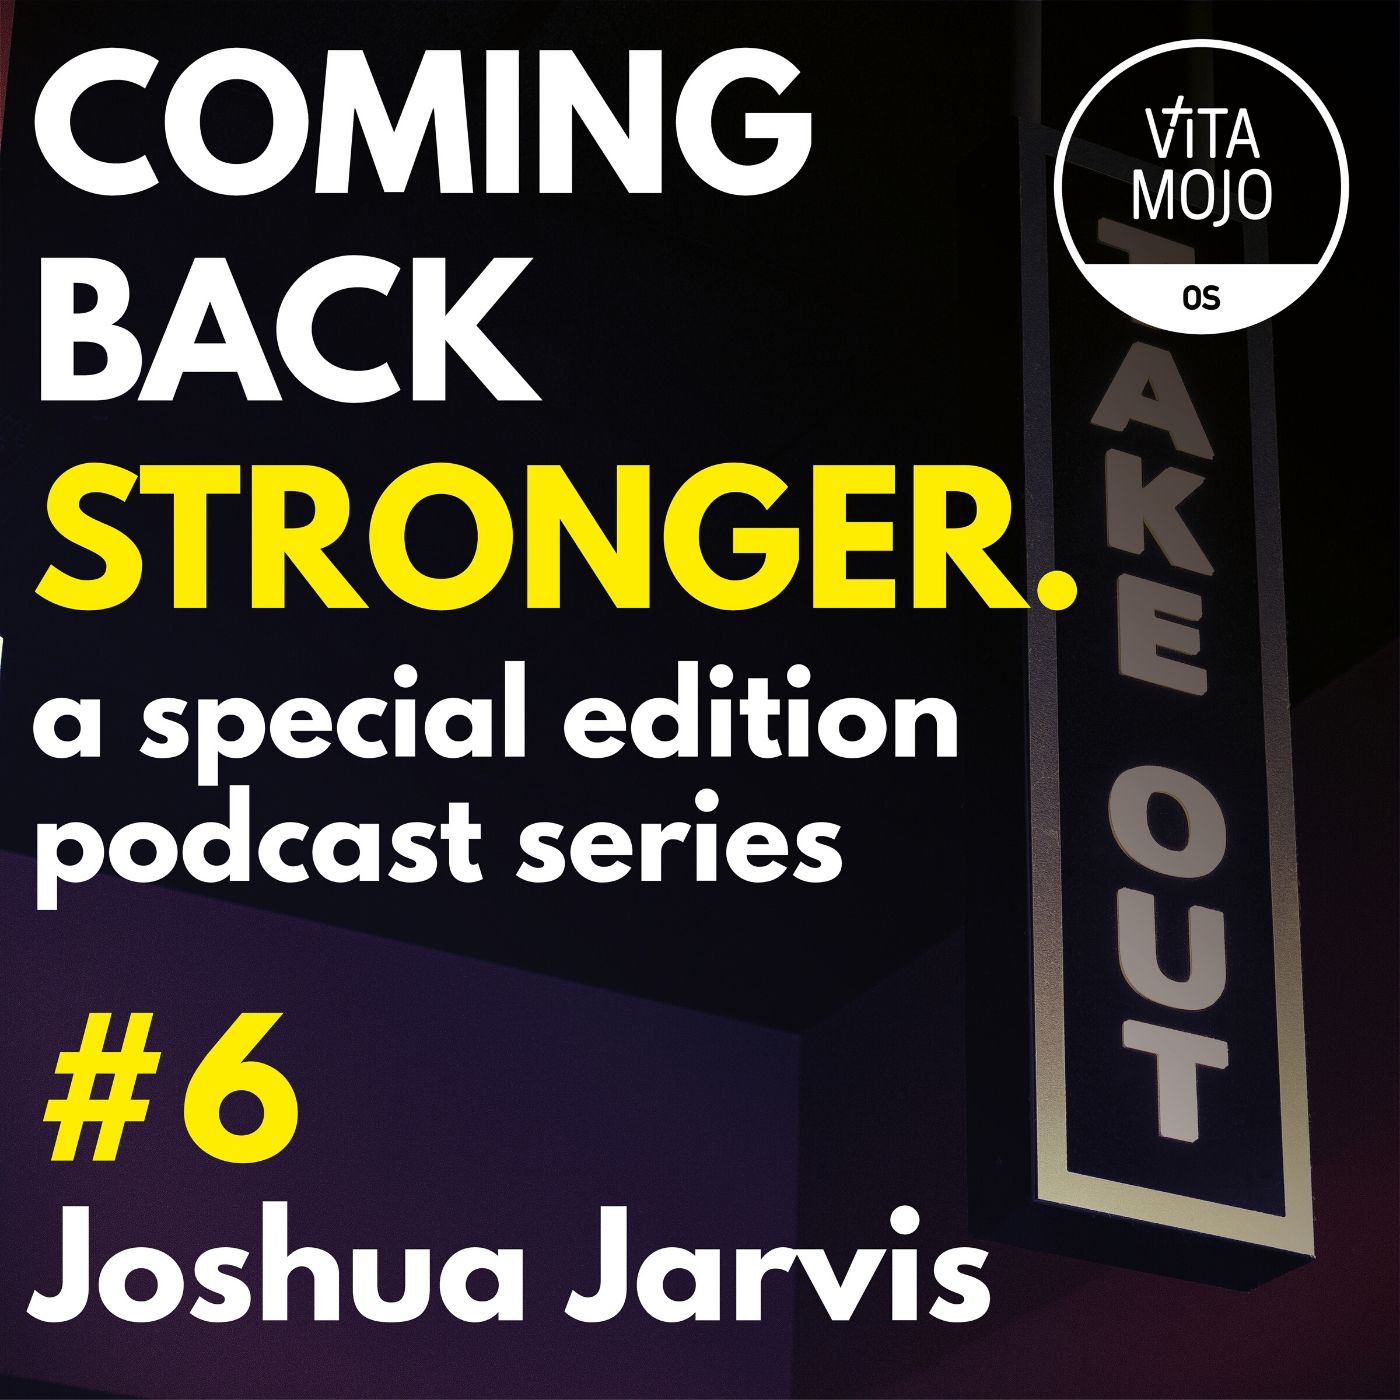 Coming Back Stronger Episode 6 with Joshua Jarvis, Founder and Co-Owner of Wing shack co & BE-ON-TREND.com Image